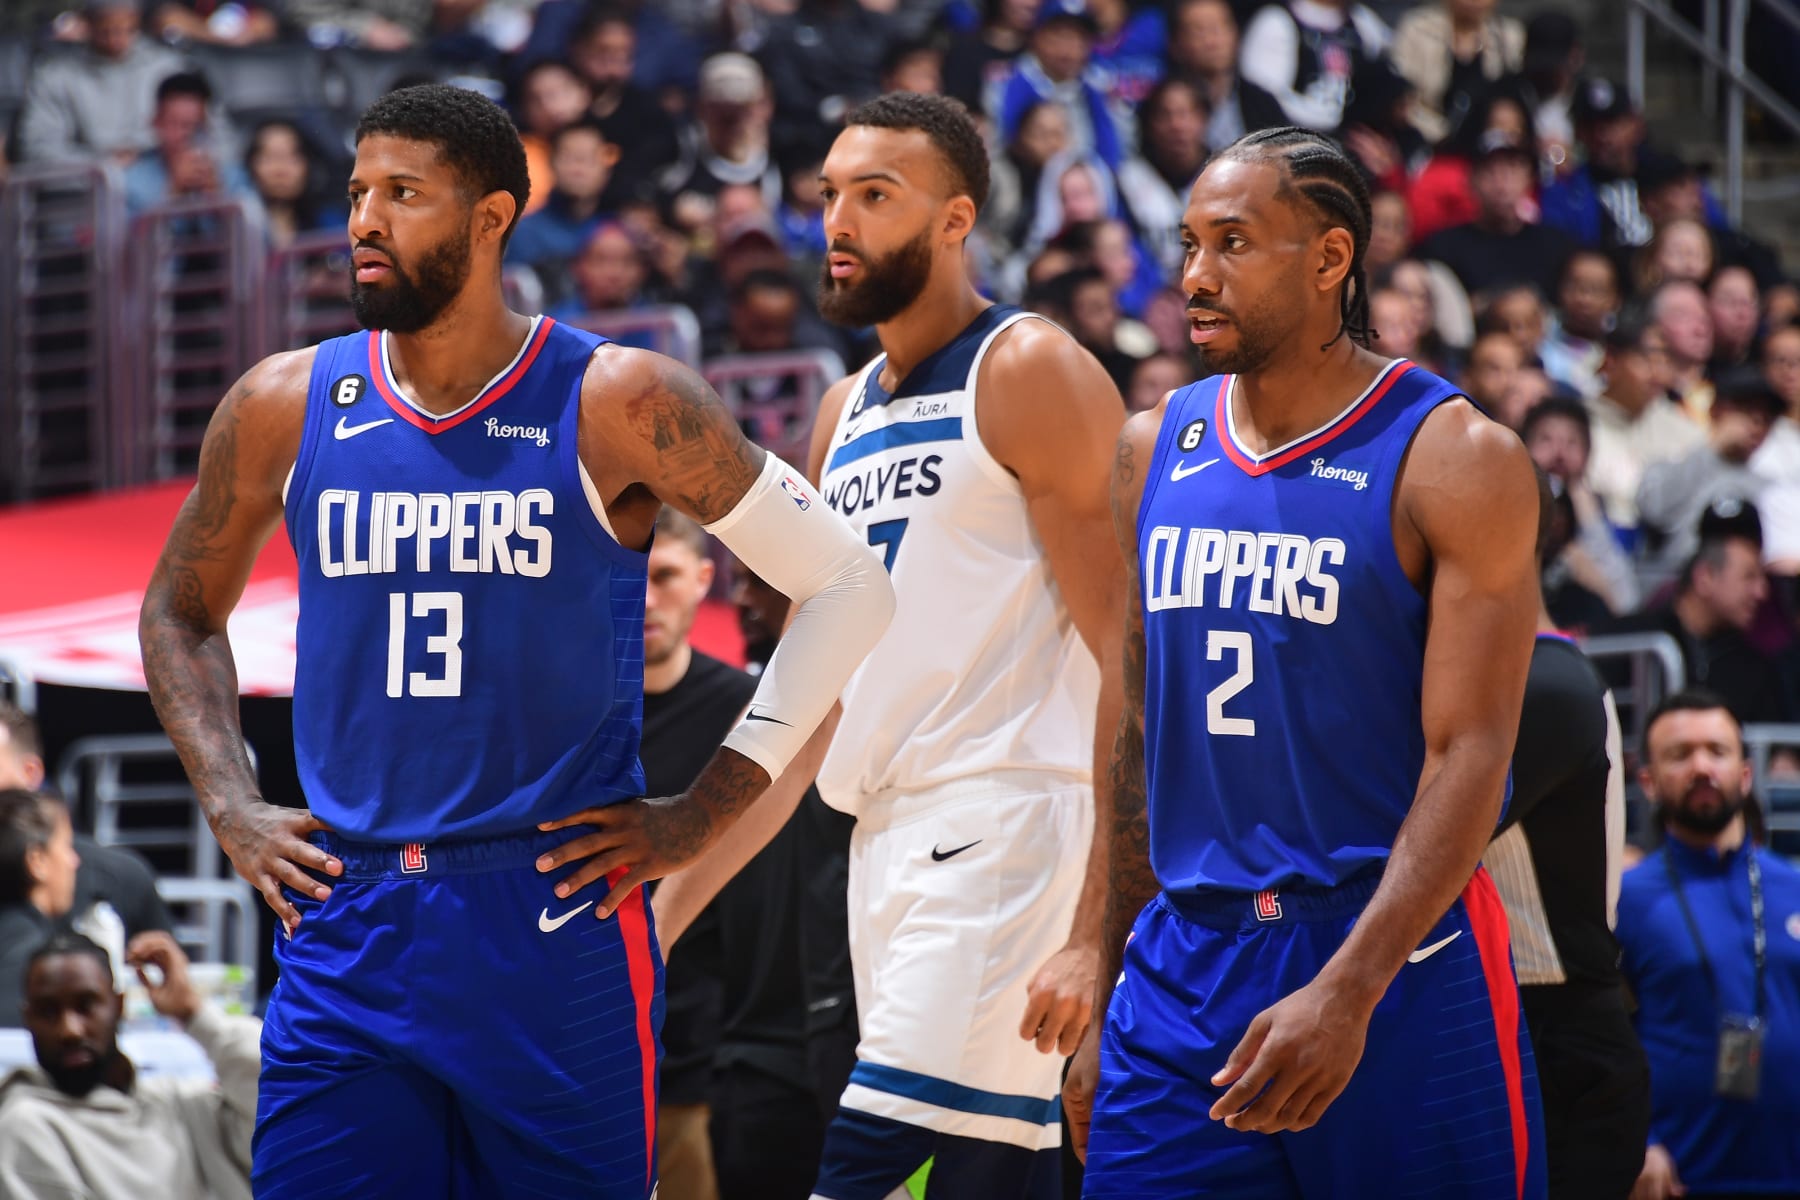 NBA Analysis: The Clippers can't see eye-to-eye over Russell